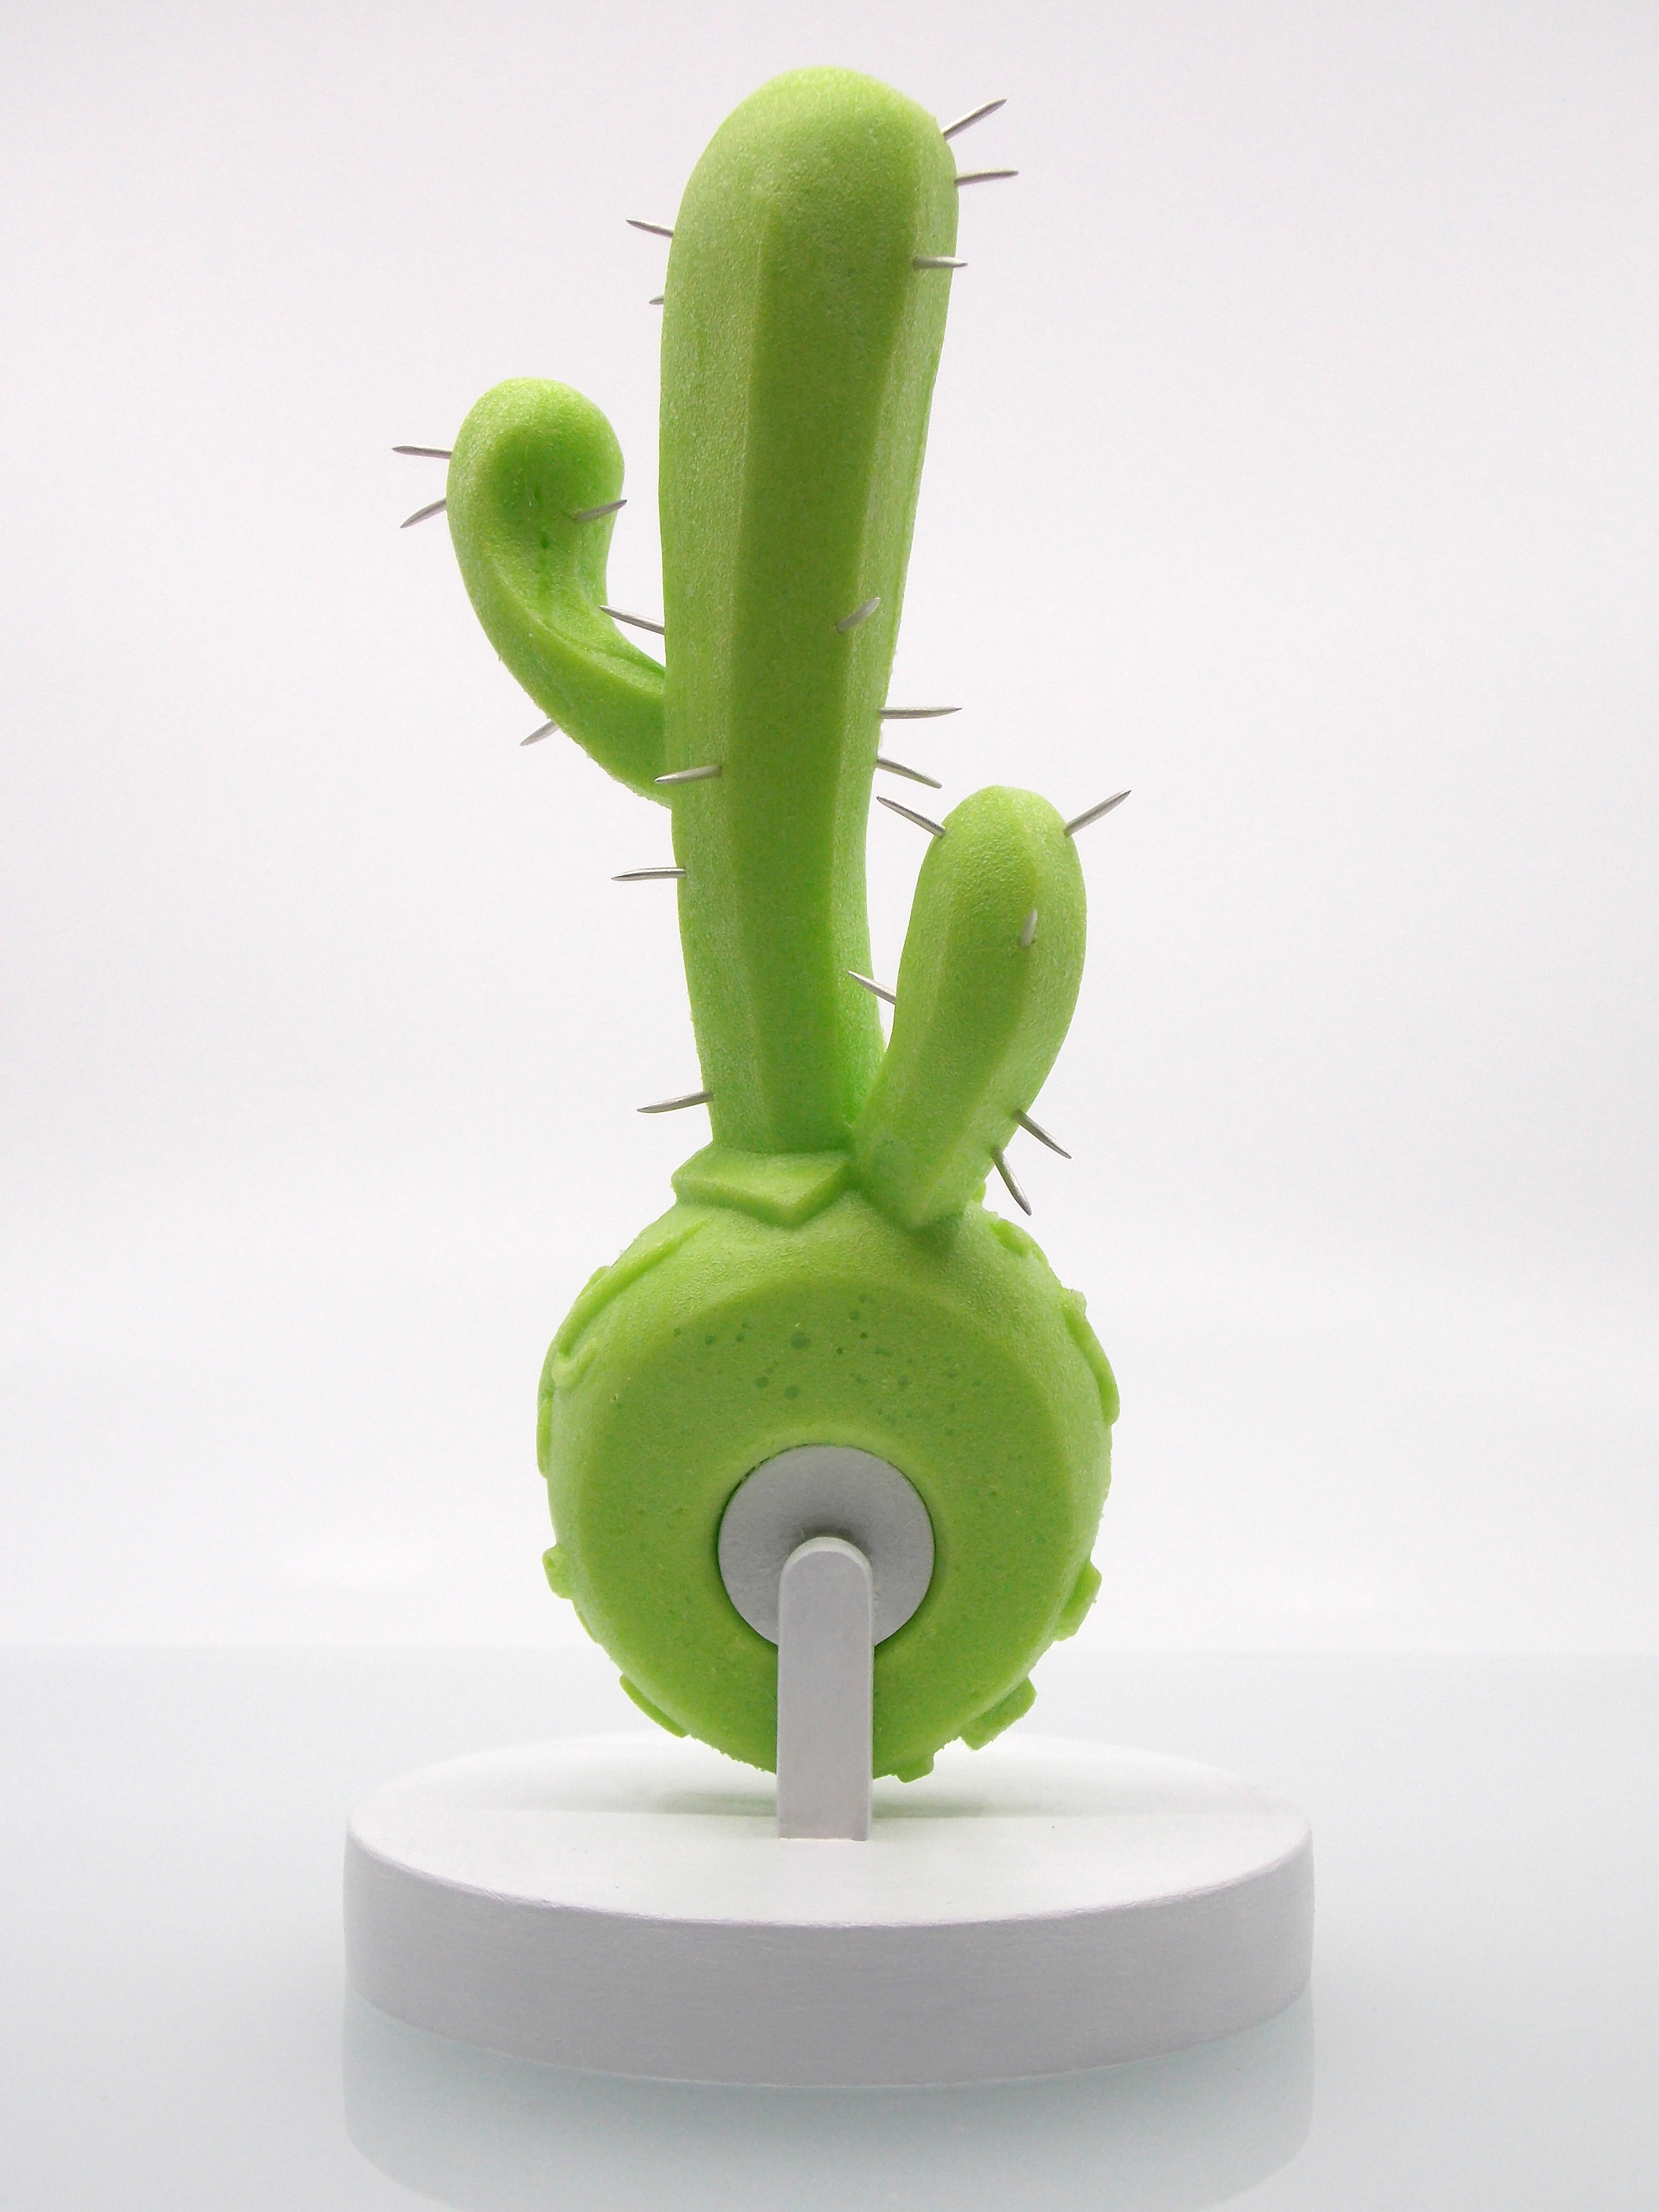 Image of Justin Scroggins' work titled 'It's a Cactus'